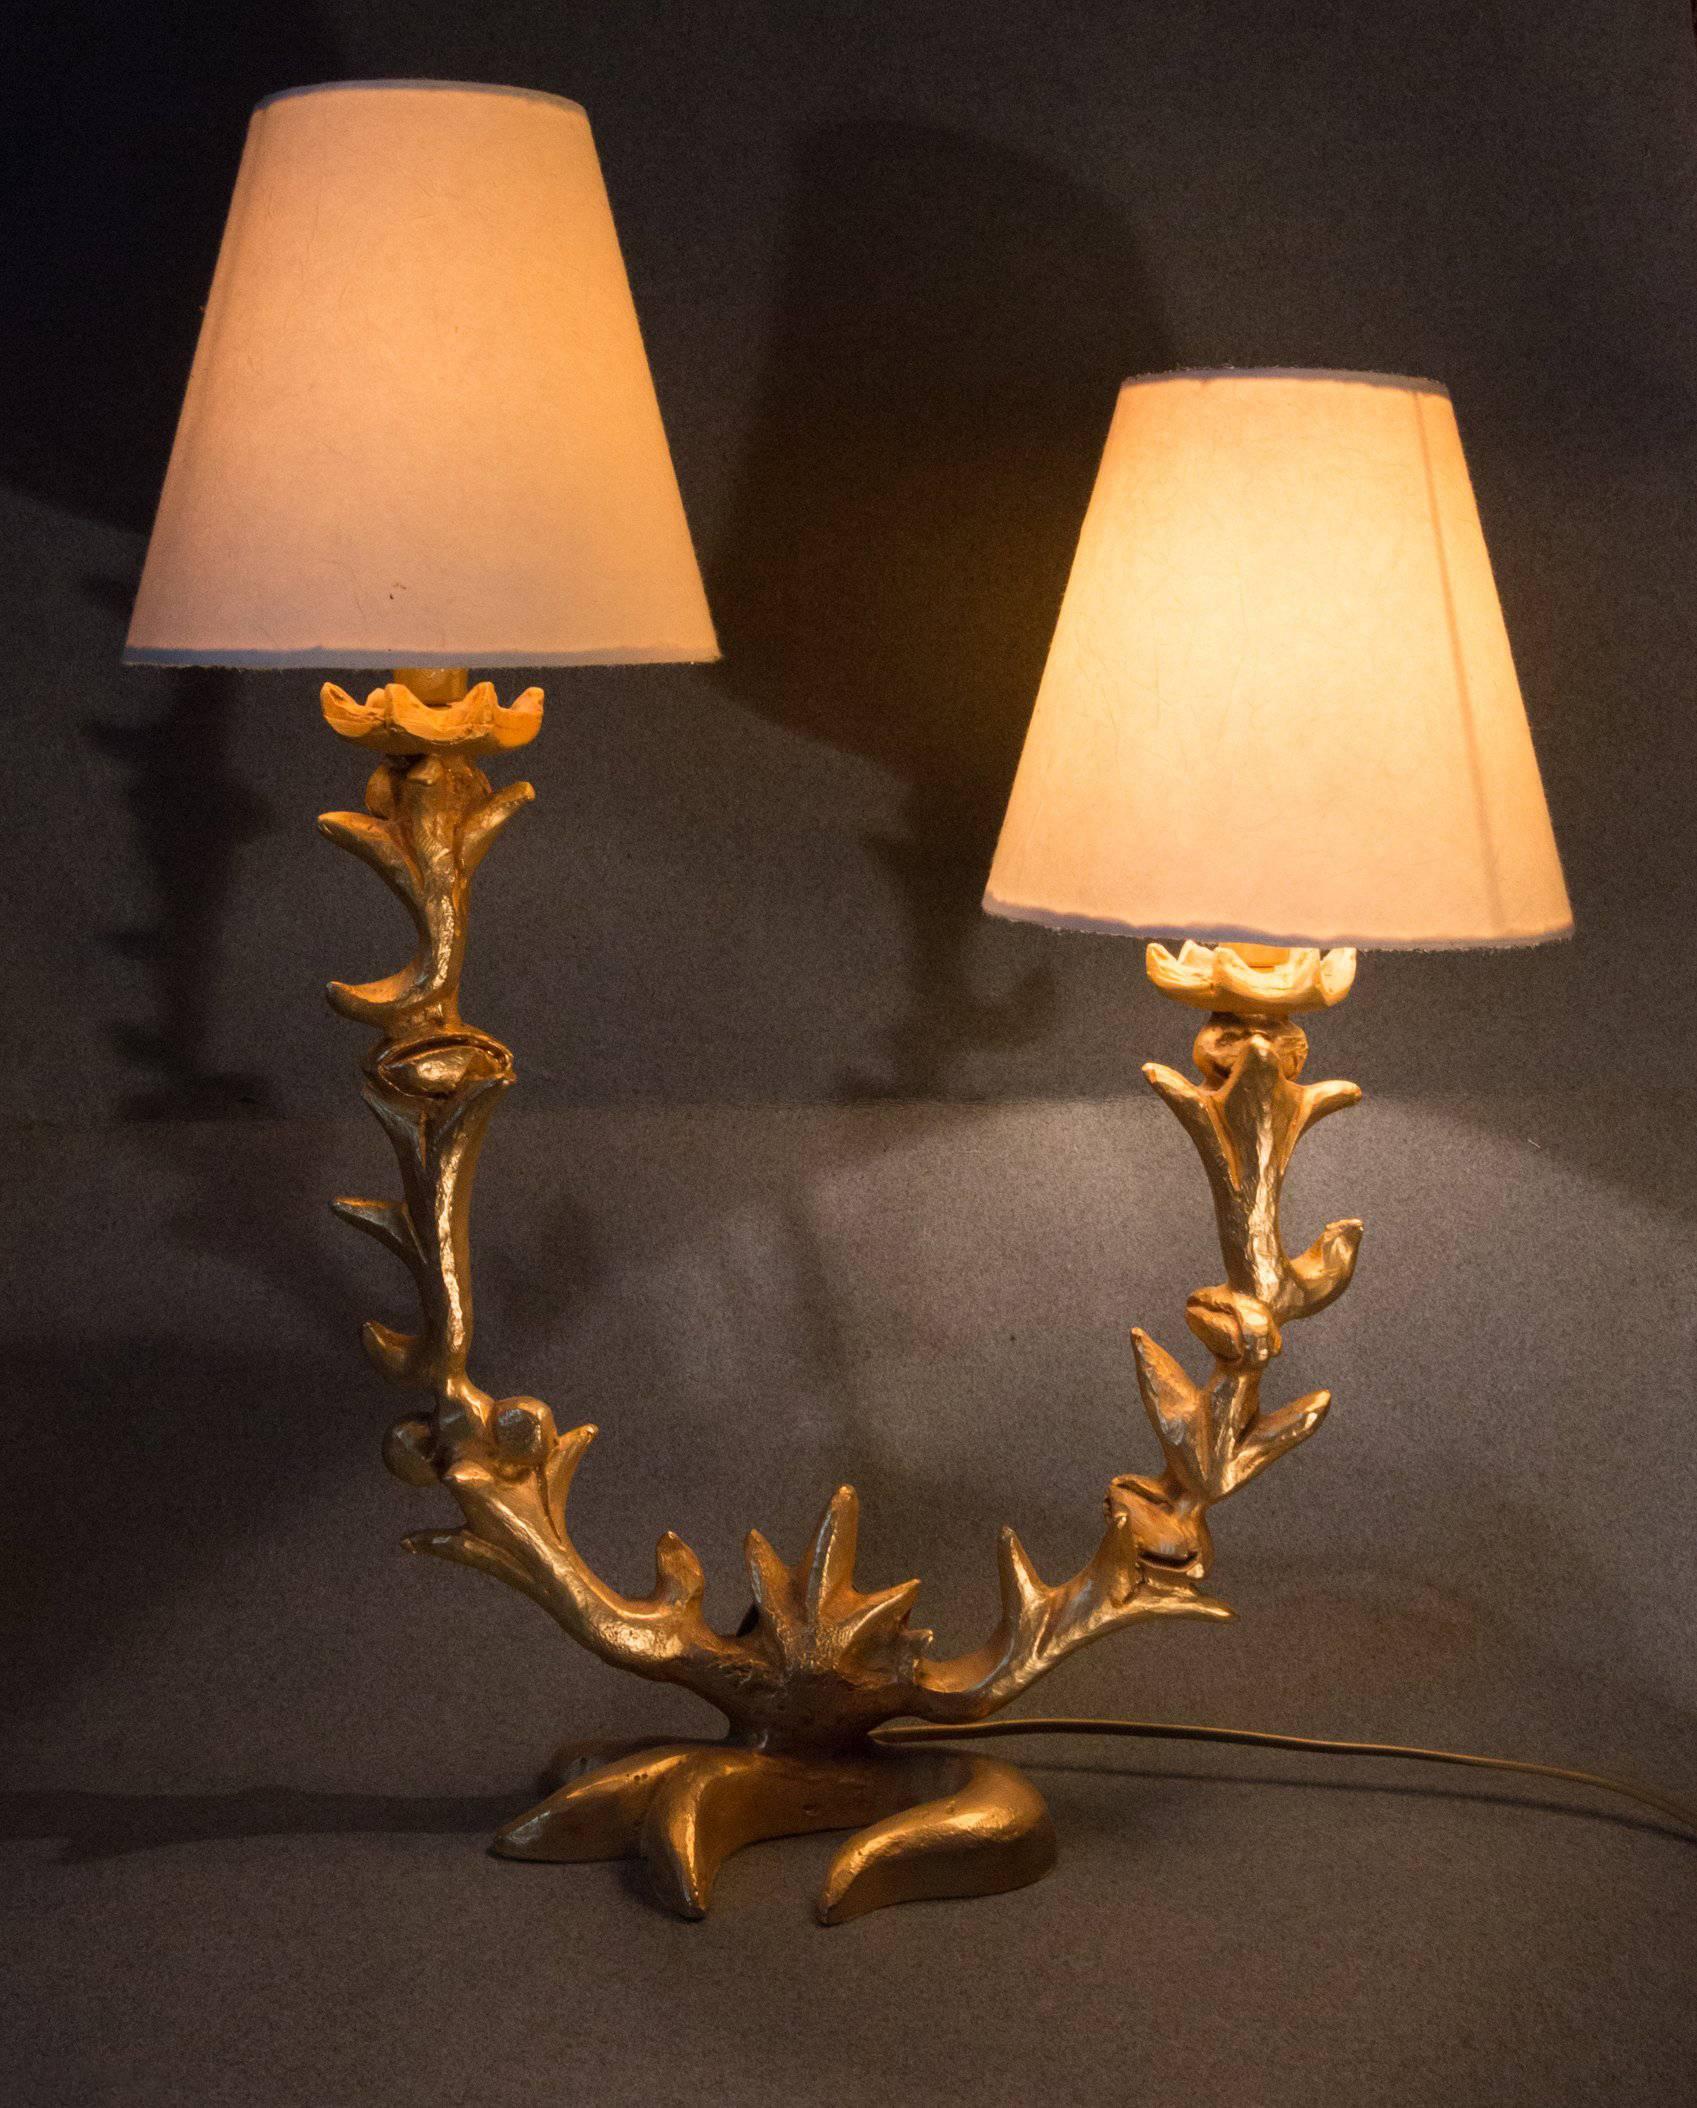 A rare and gorgeous sculptural ormolu table lamp sign by Georges Mathias for Fondica, France in 1995. Our lamp was bought directly to Fondica by us in 1995, it is in a Fine original condition.
The lamp is composed of two asymmetric arm lights.